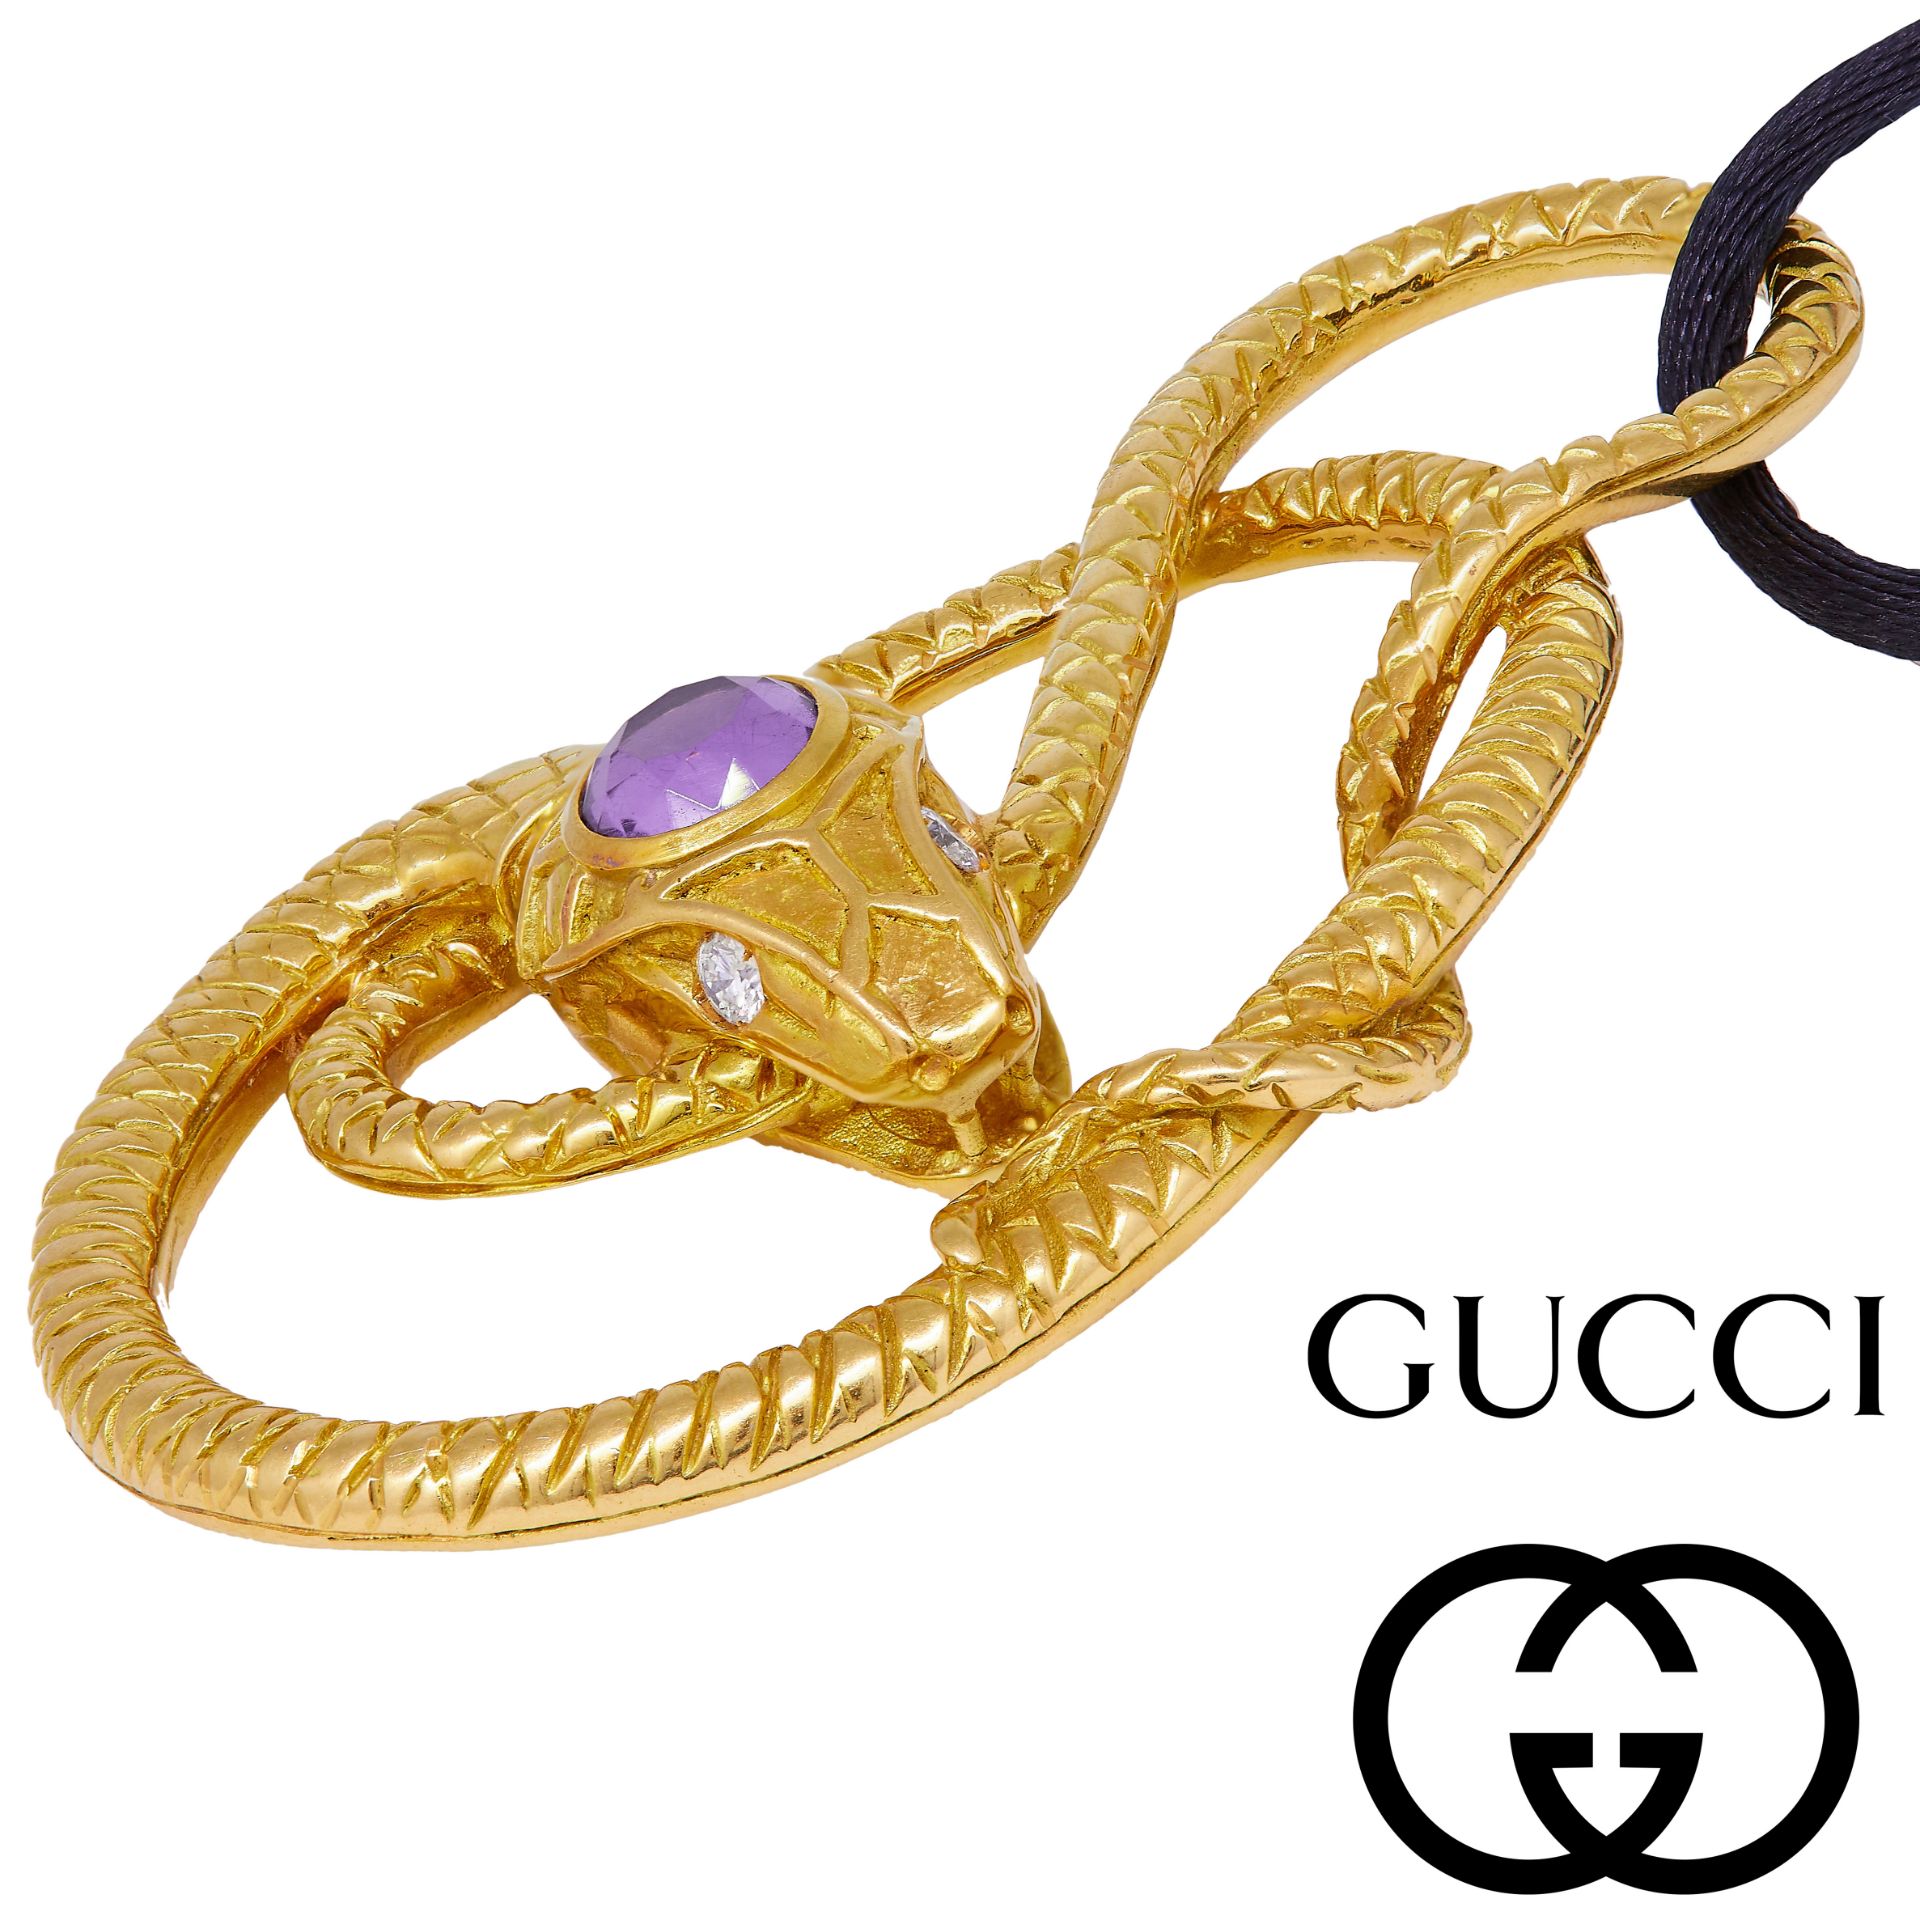 GUCCI, CURLED SNAKE PENDANT